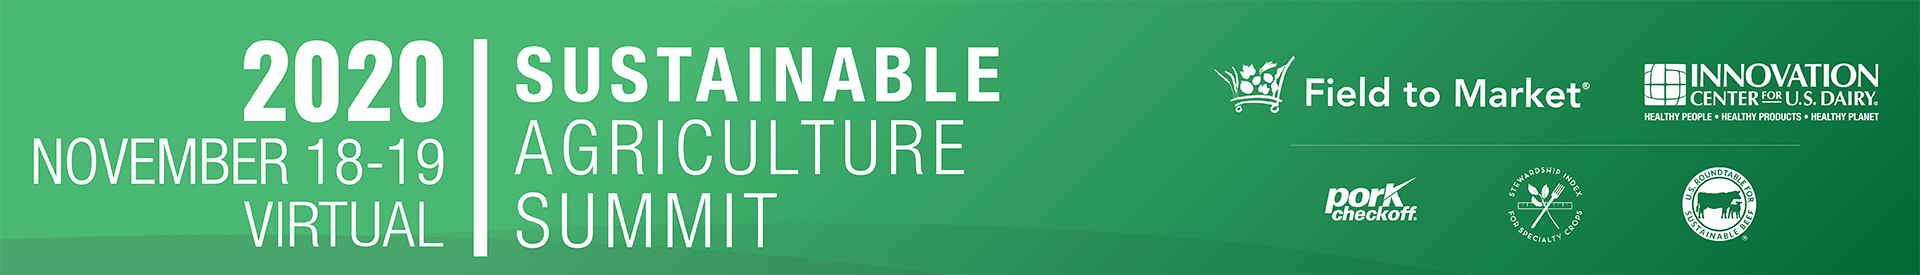 2020 Sustainable Agriculture Summit Event Banner